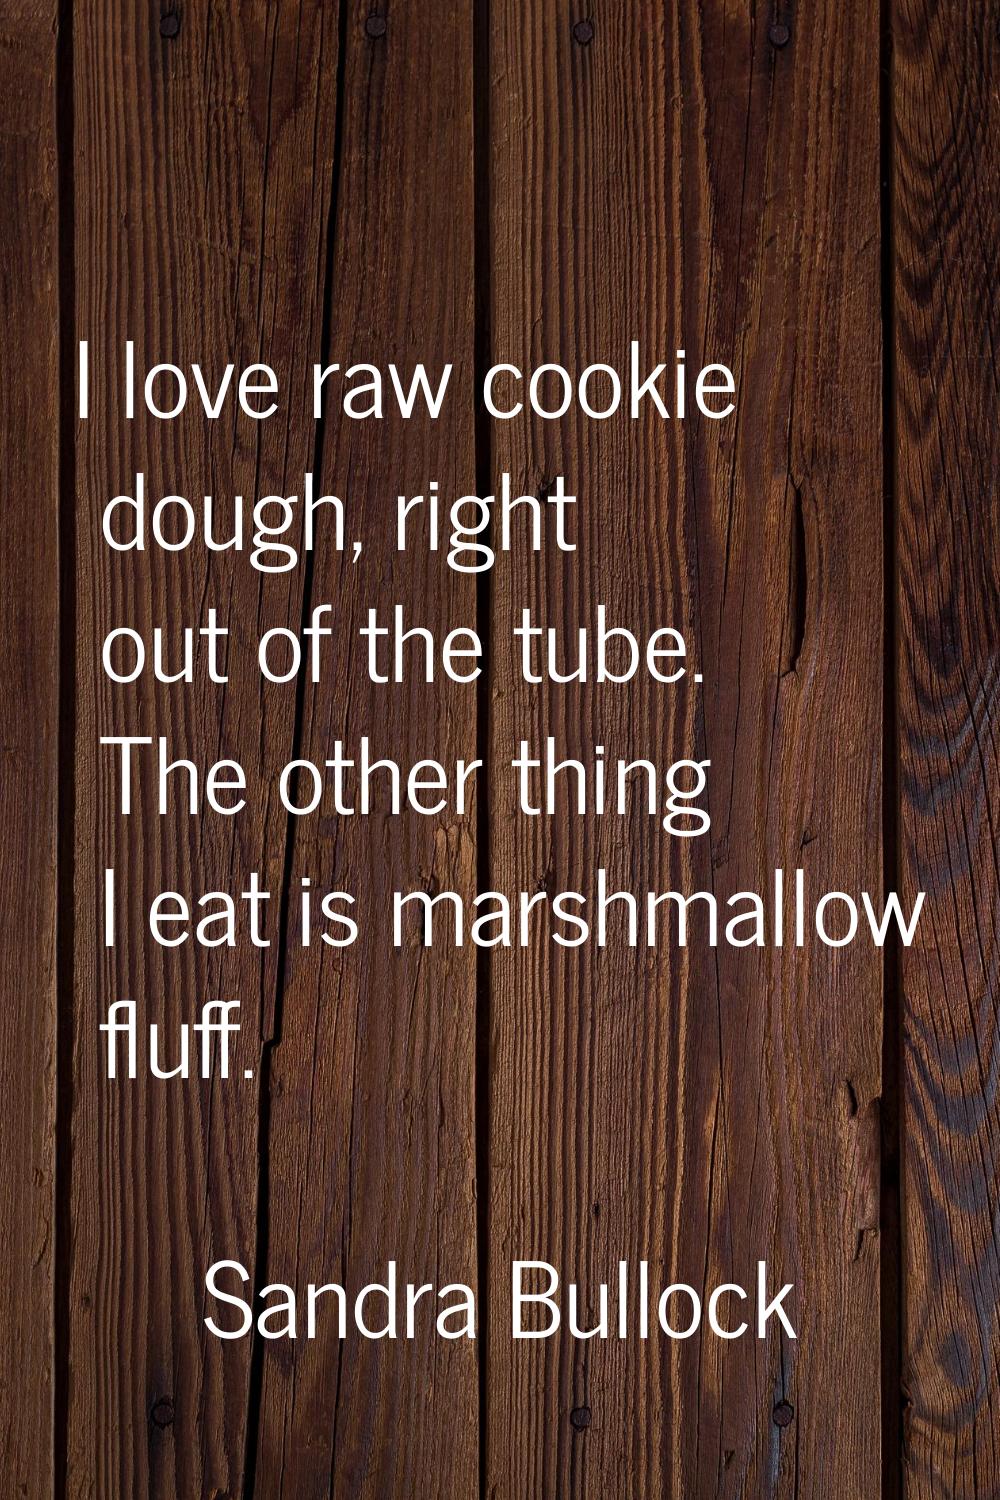 I love raw cookie dough, right out of the tube. The other thing I eat is marshmallow fluff.